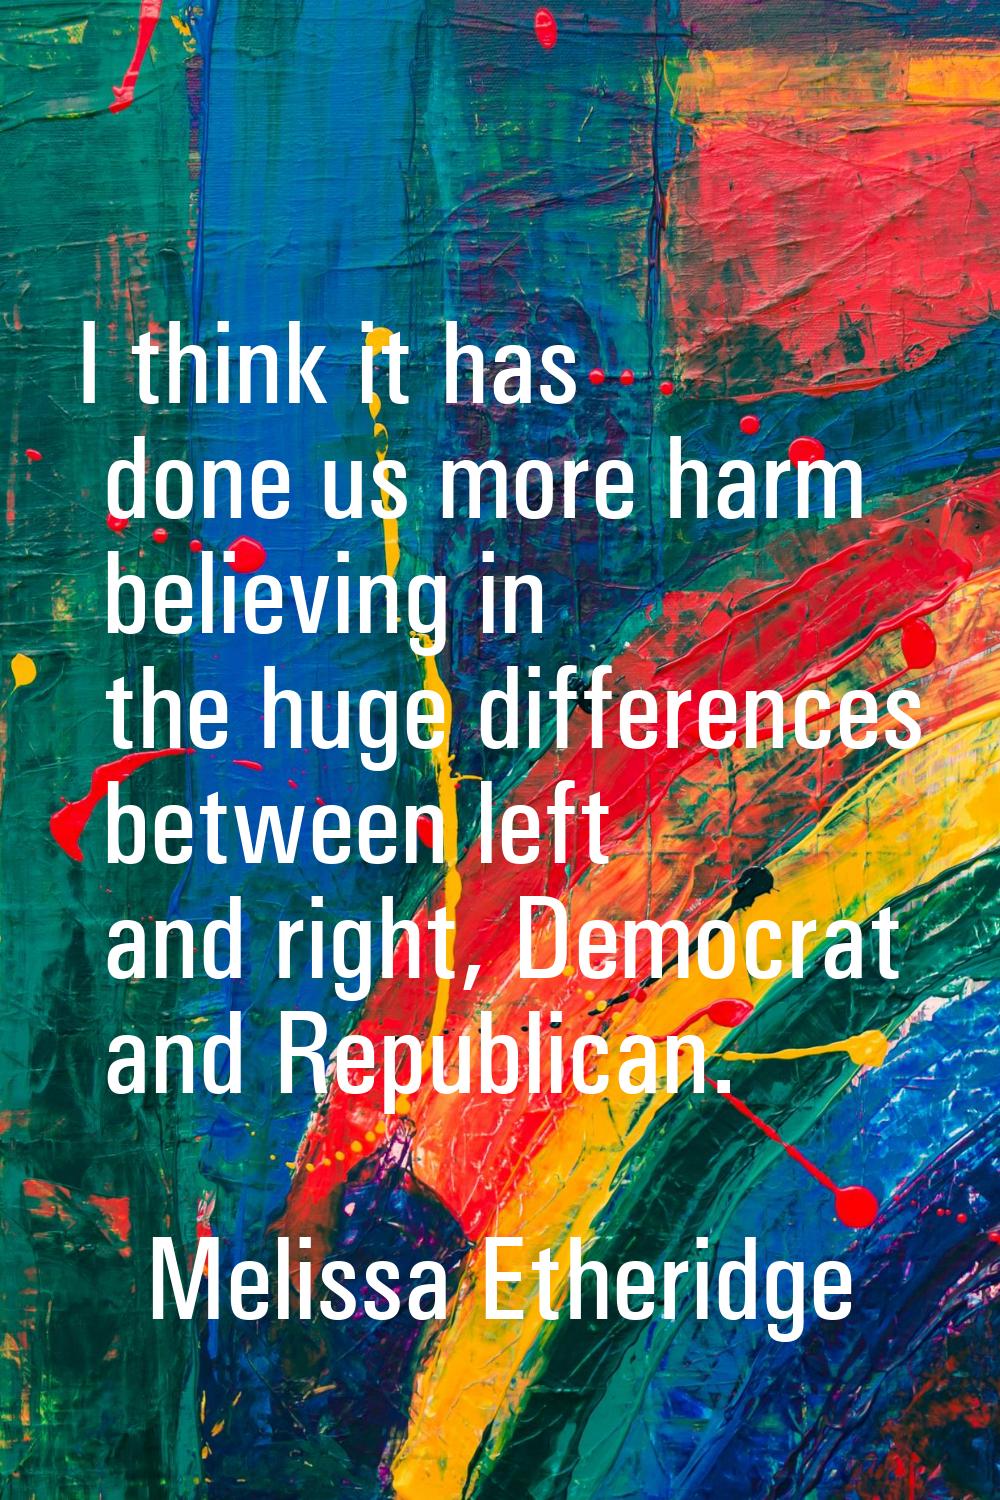 I think it has done us more harm believing in the huge differences between left and right, Democrat